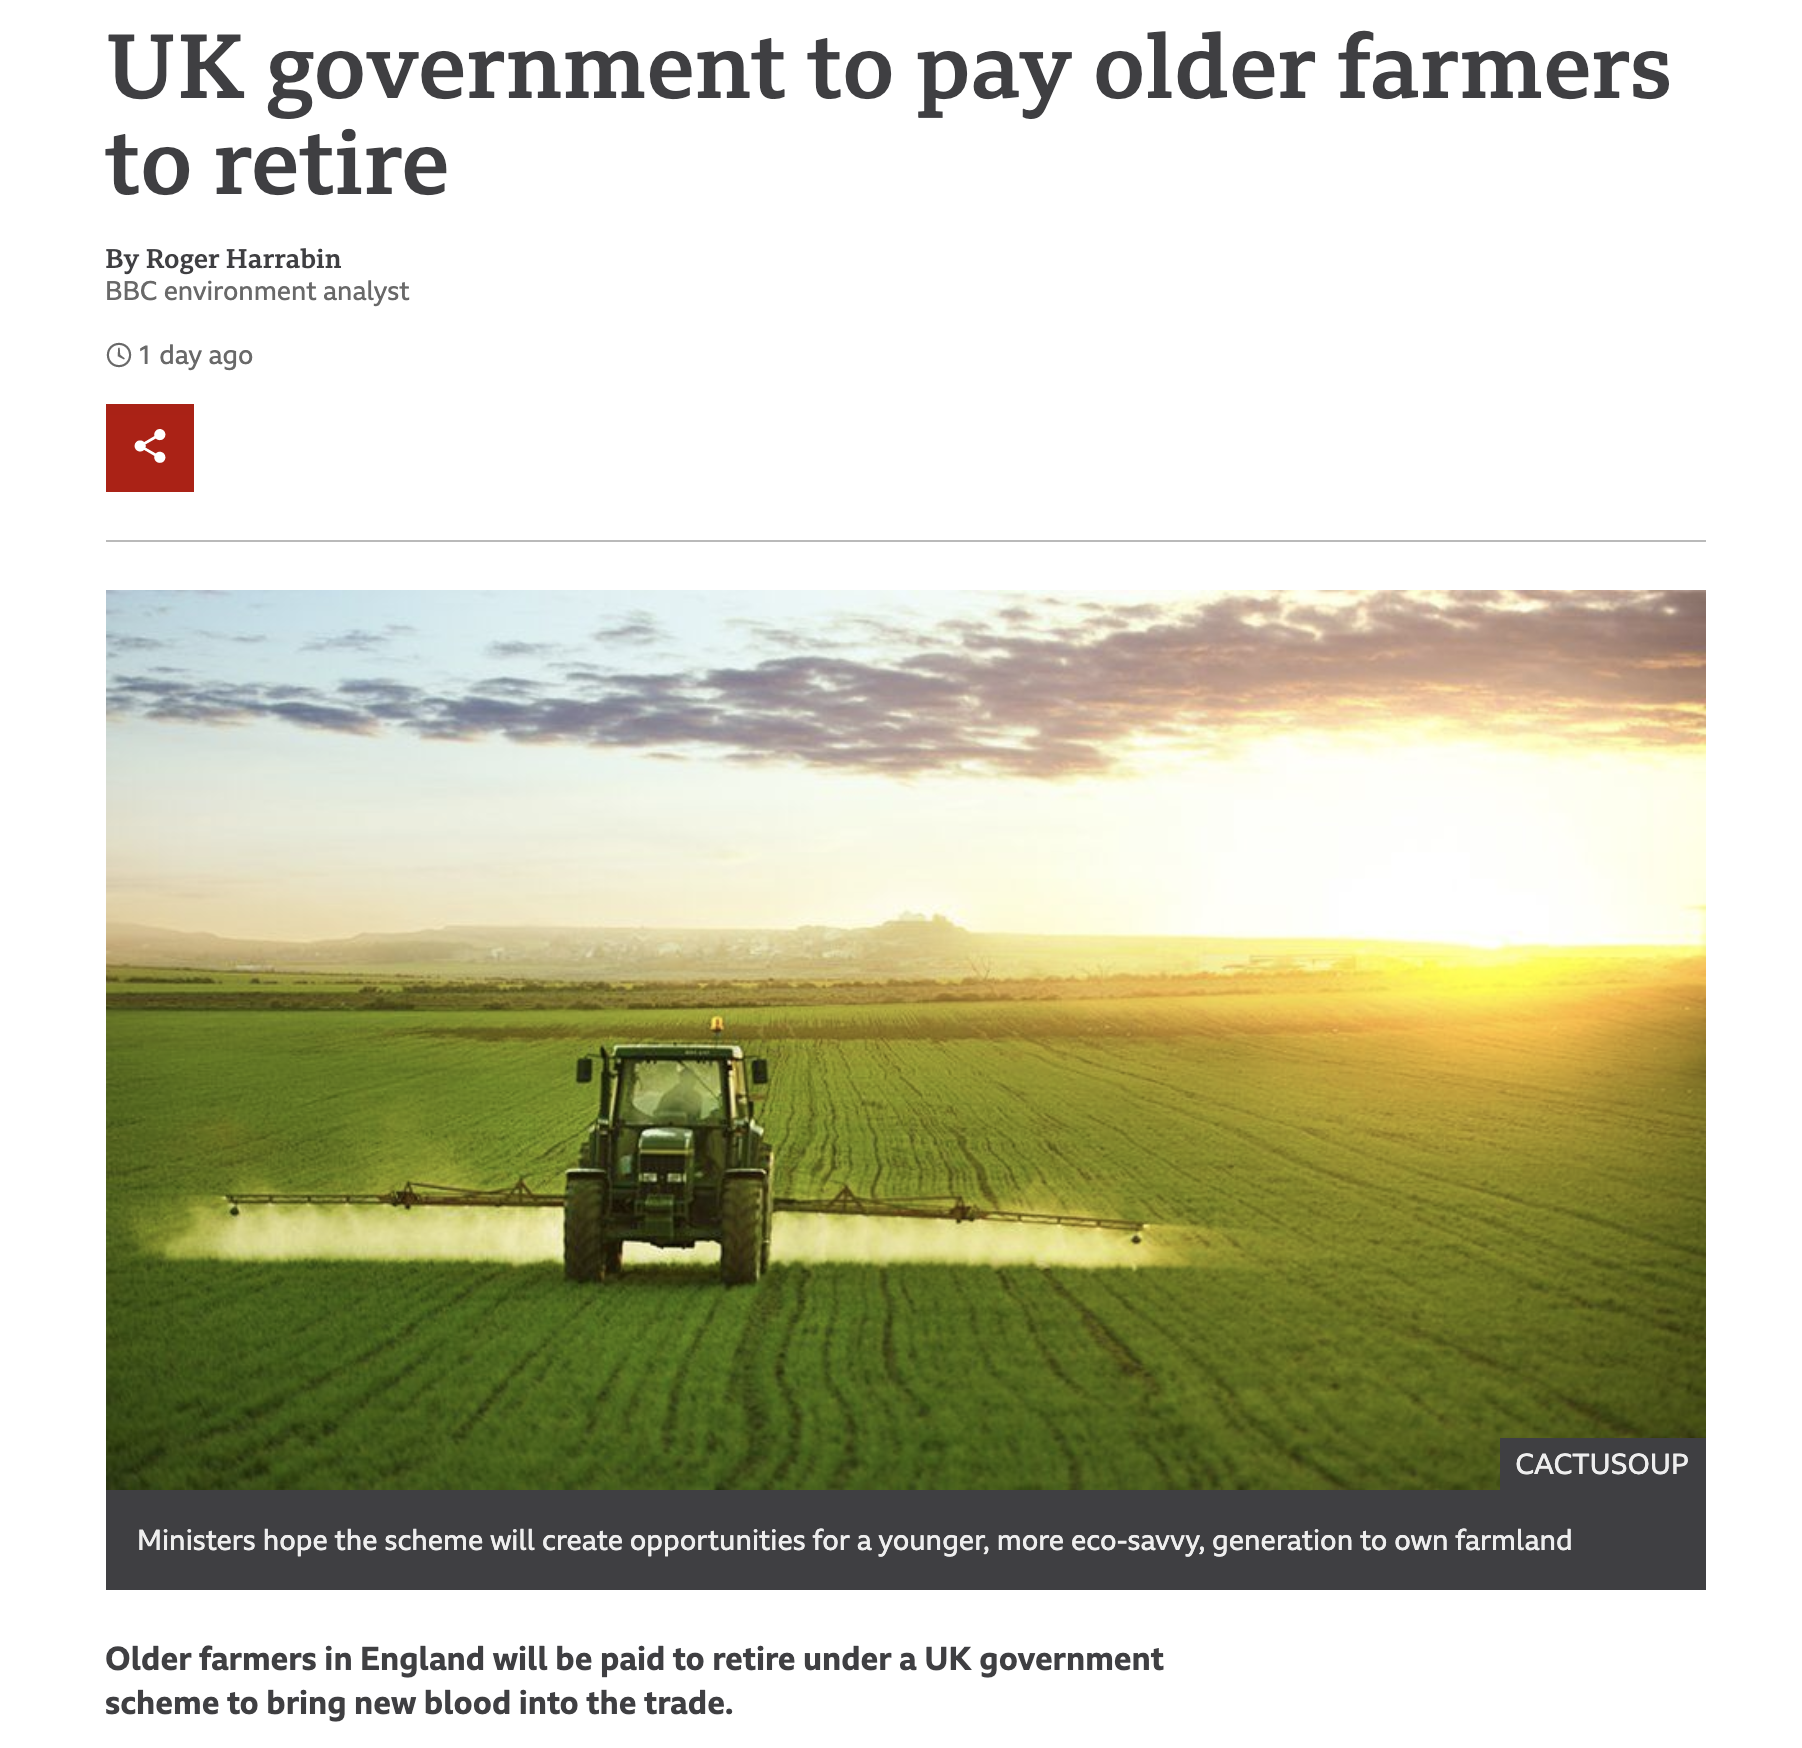 Paying older farmers to retire